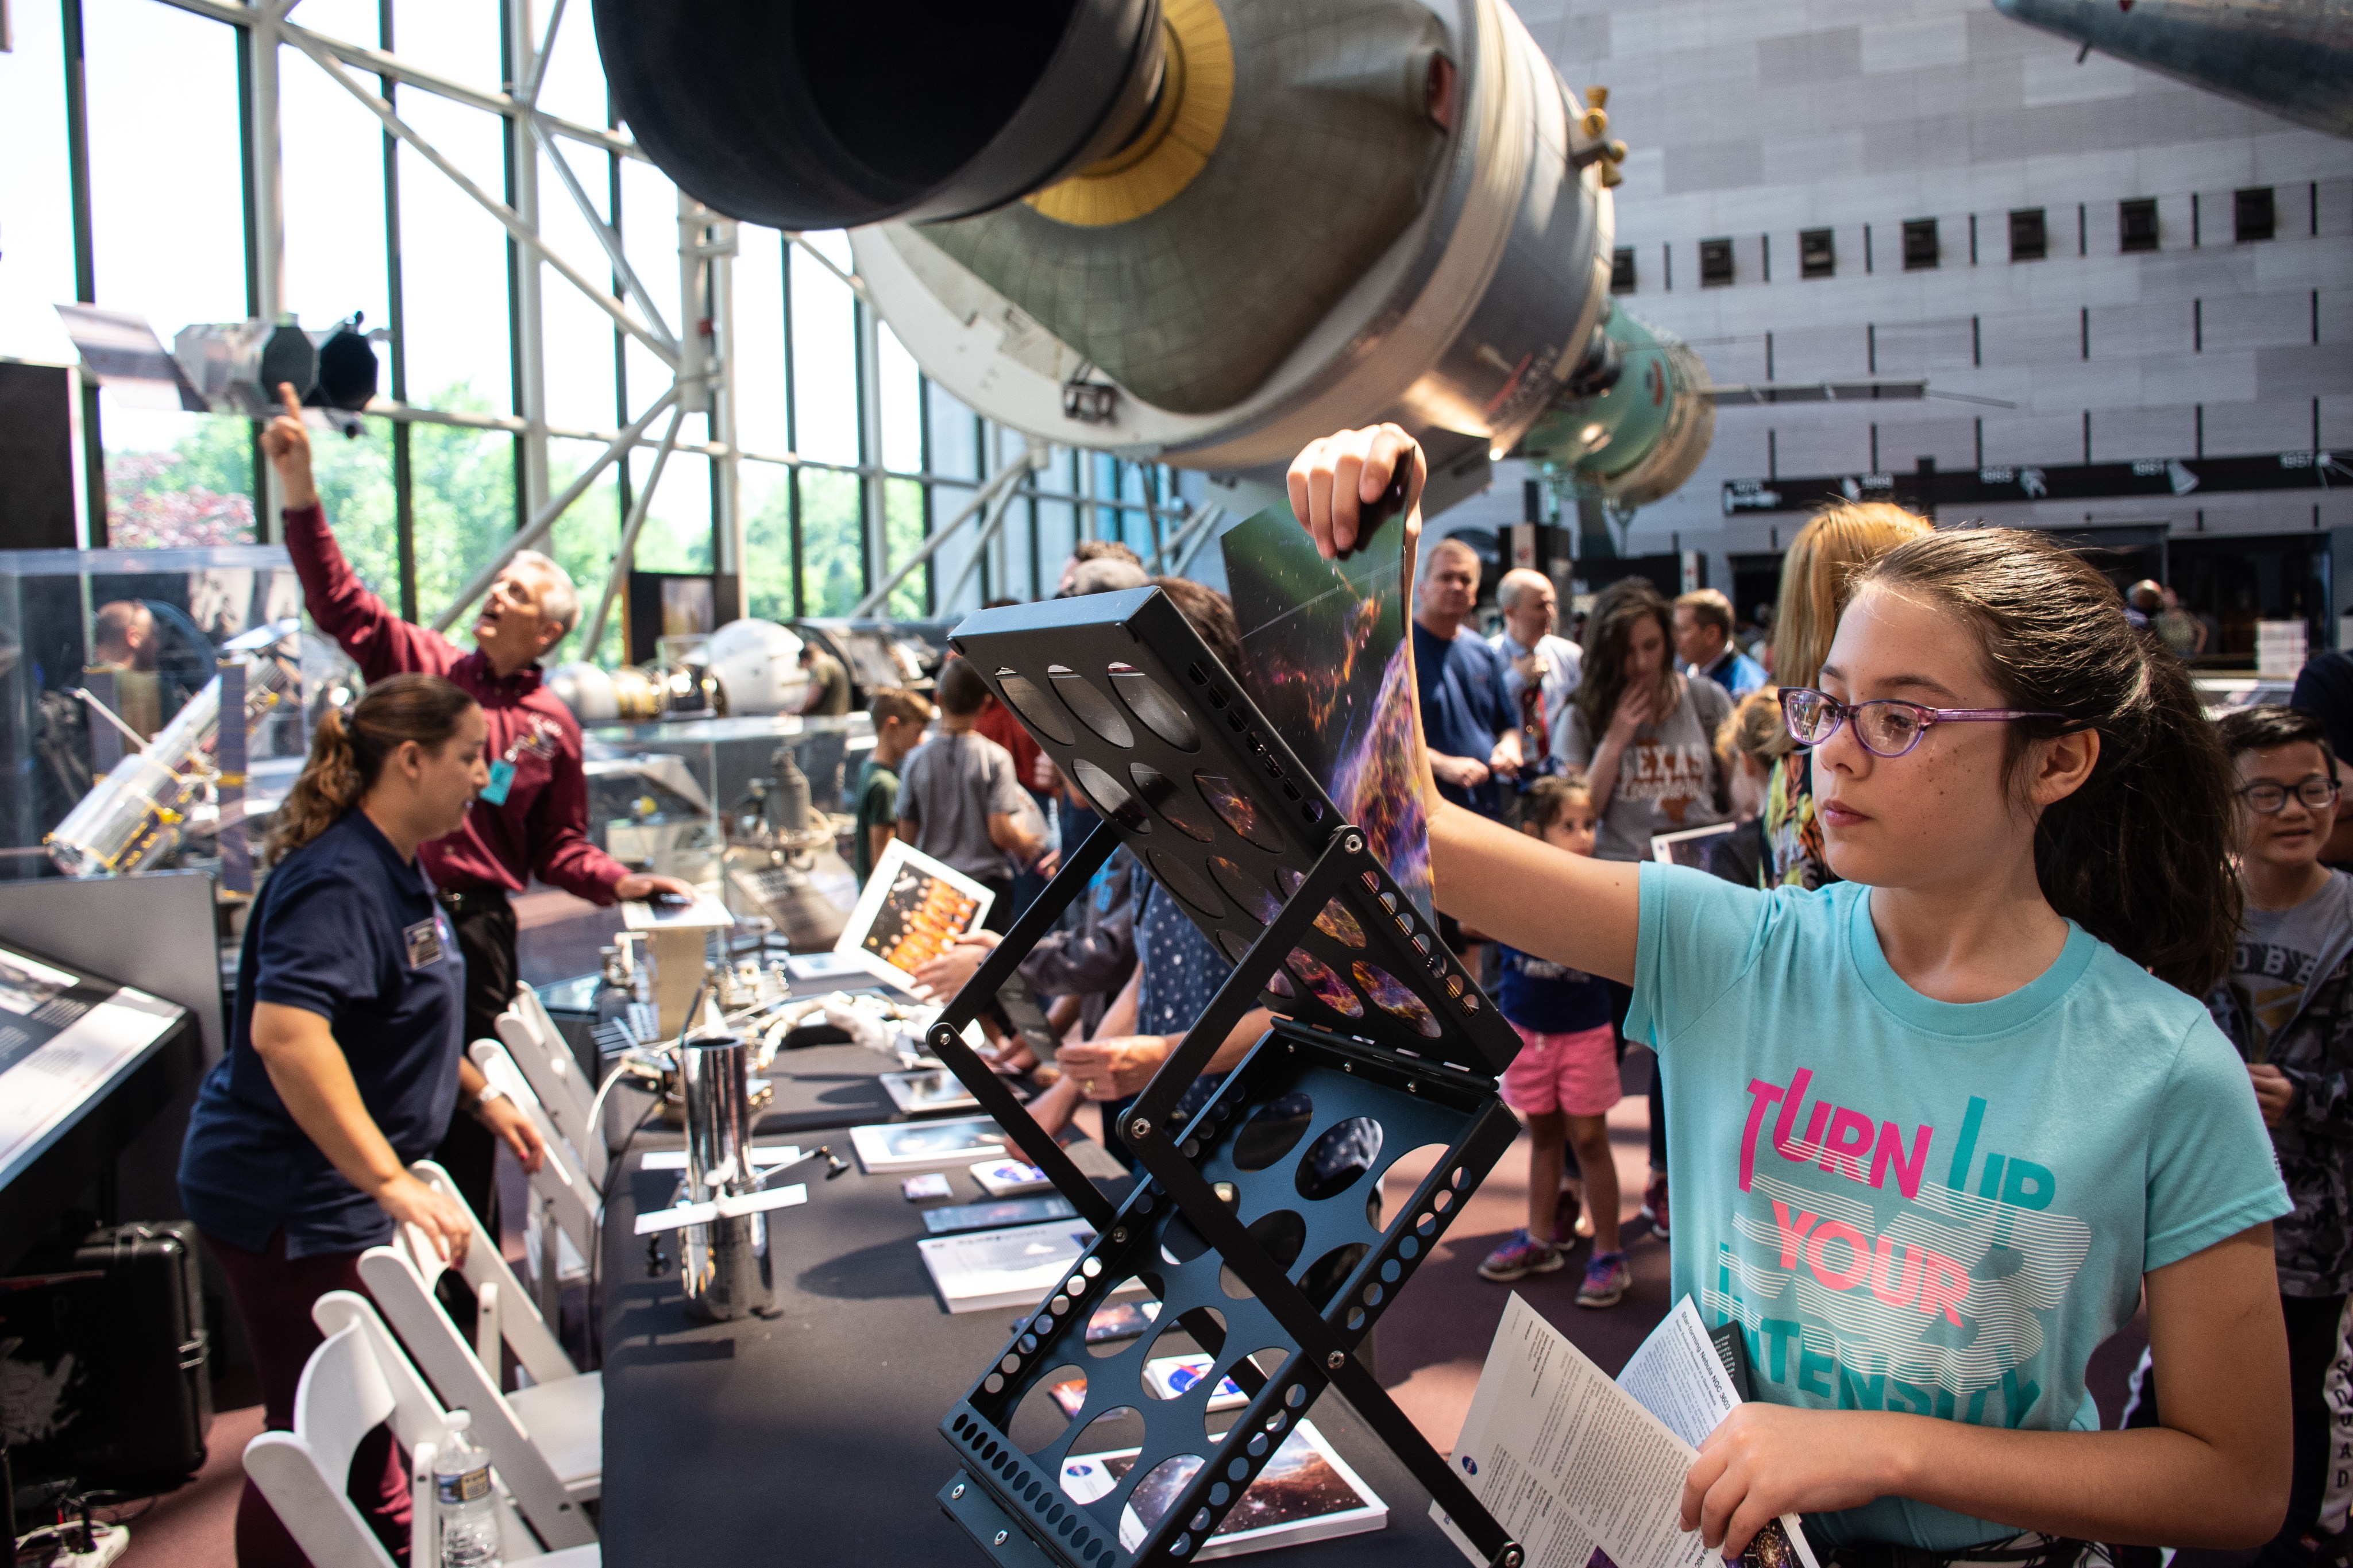 A girl selects Hubble images to take home from a table covered with Hubble activities. A large model of Hubble is visible in the background alongside other spacecraft exhibits at the National Air and Space Museum.